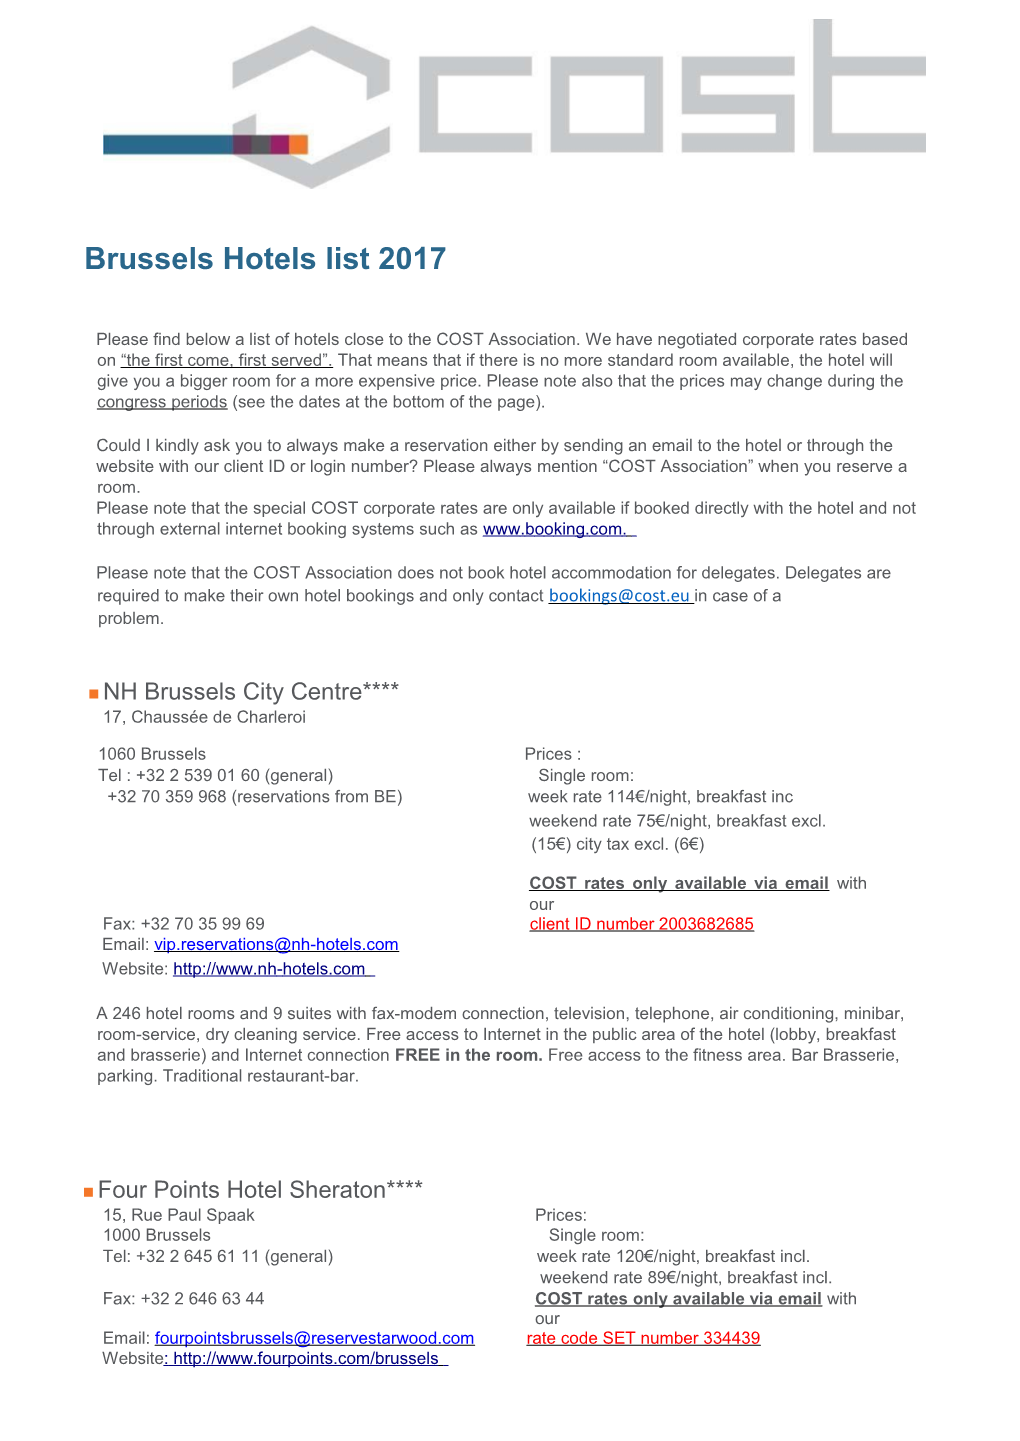 Brussels Hotels List 2017